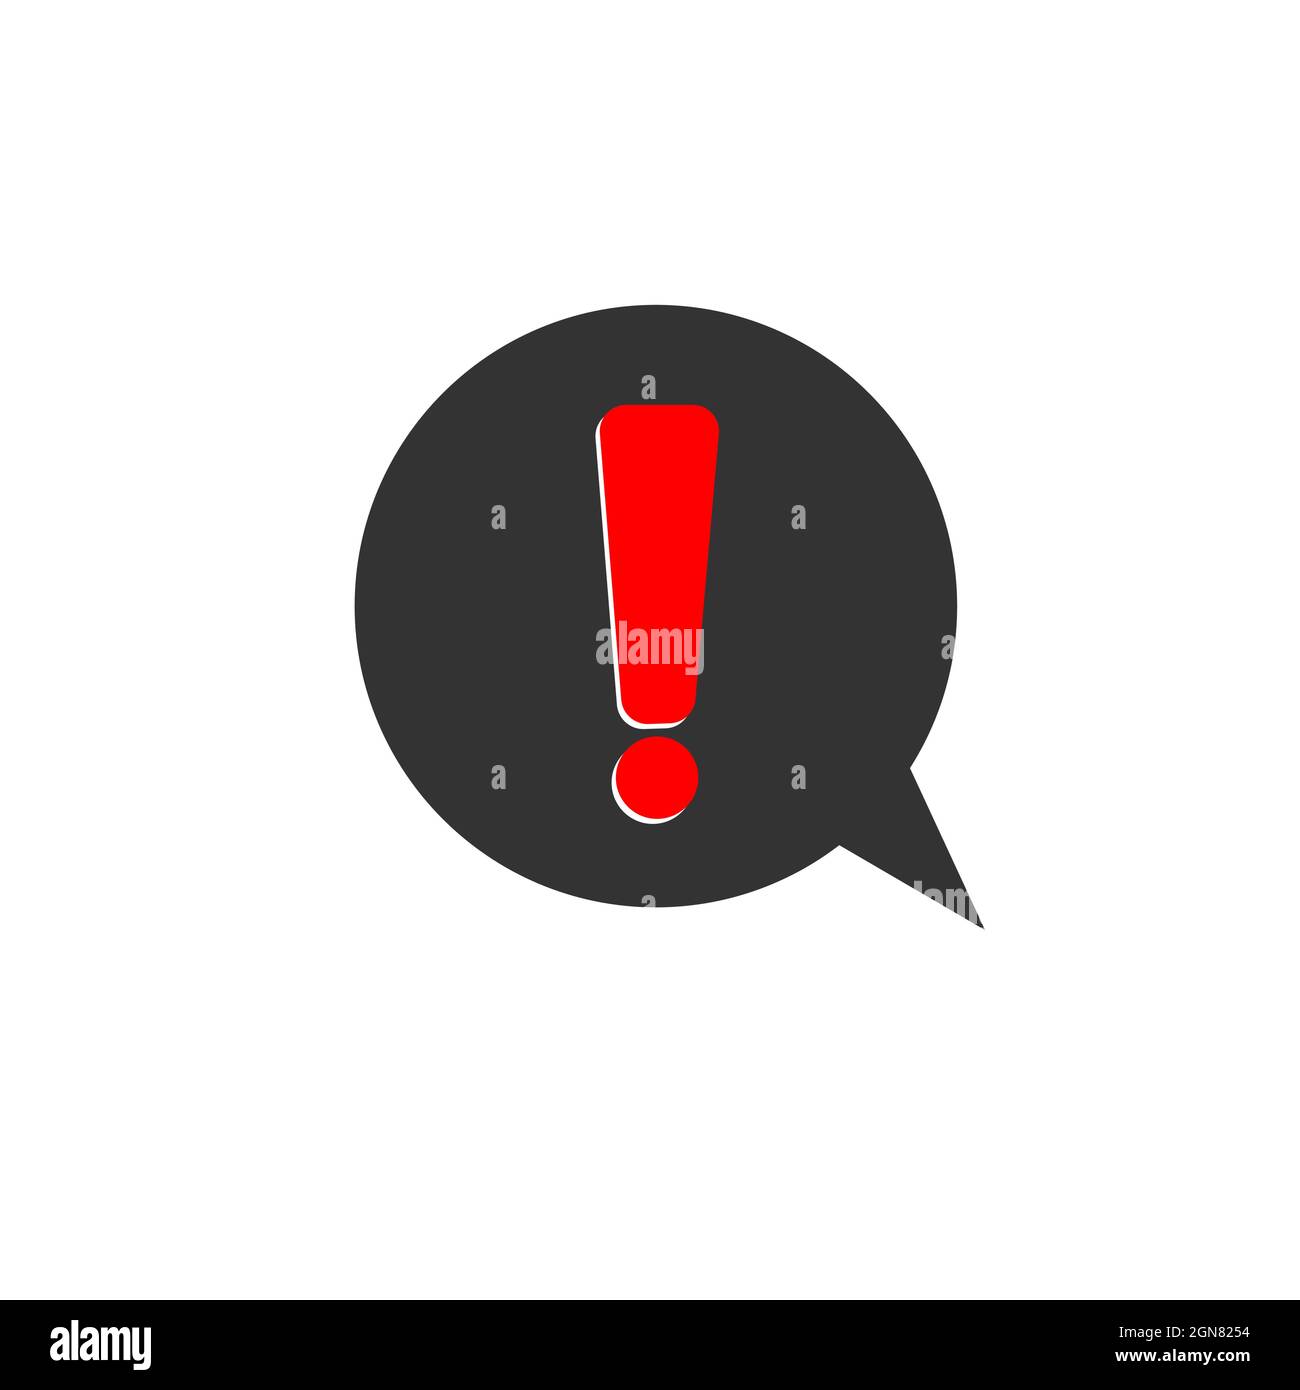 Alert icon isolated on white background, alert message sign vector illustration Stock Vector